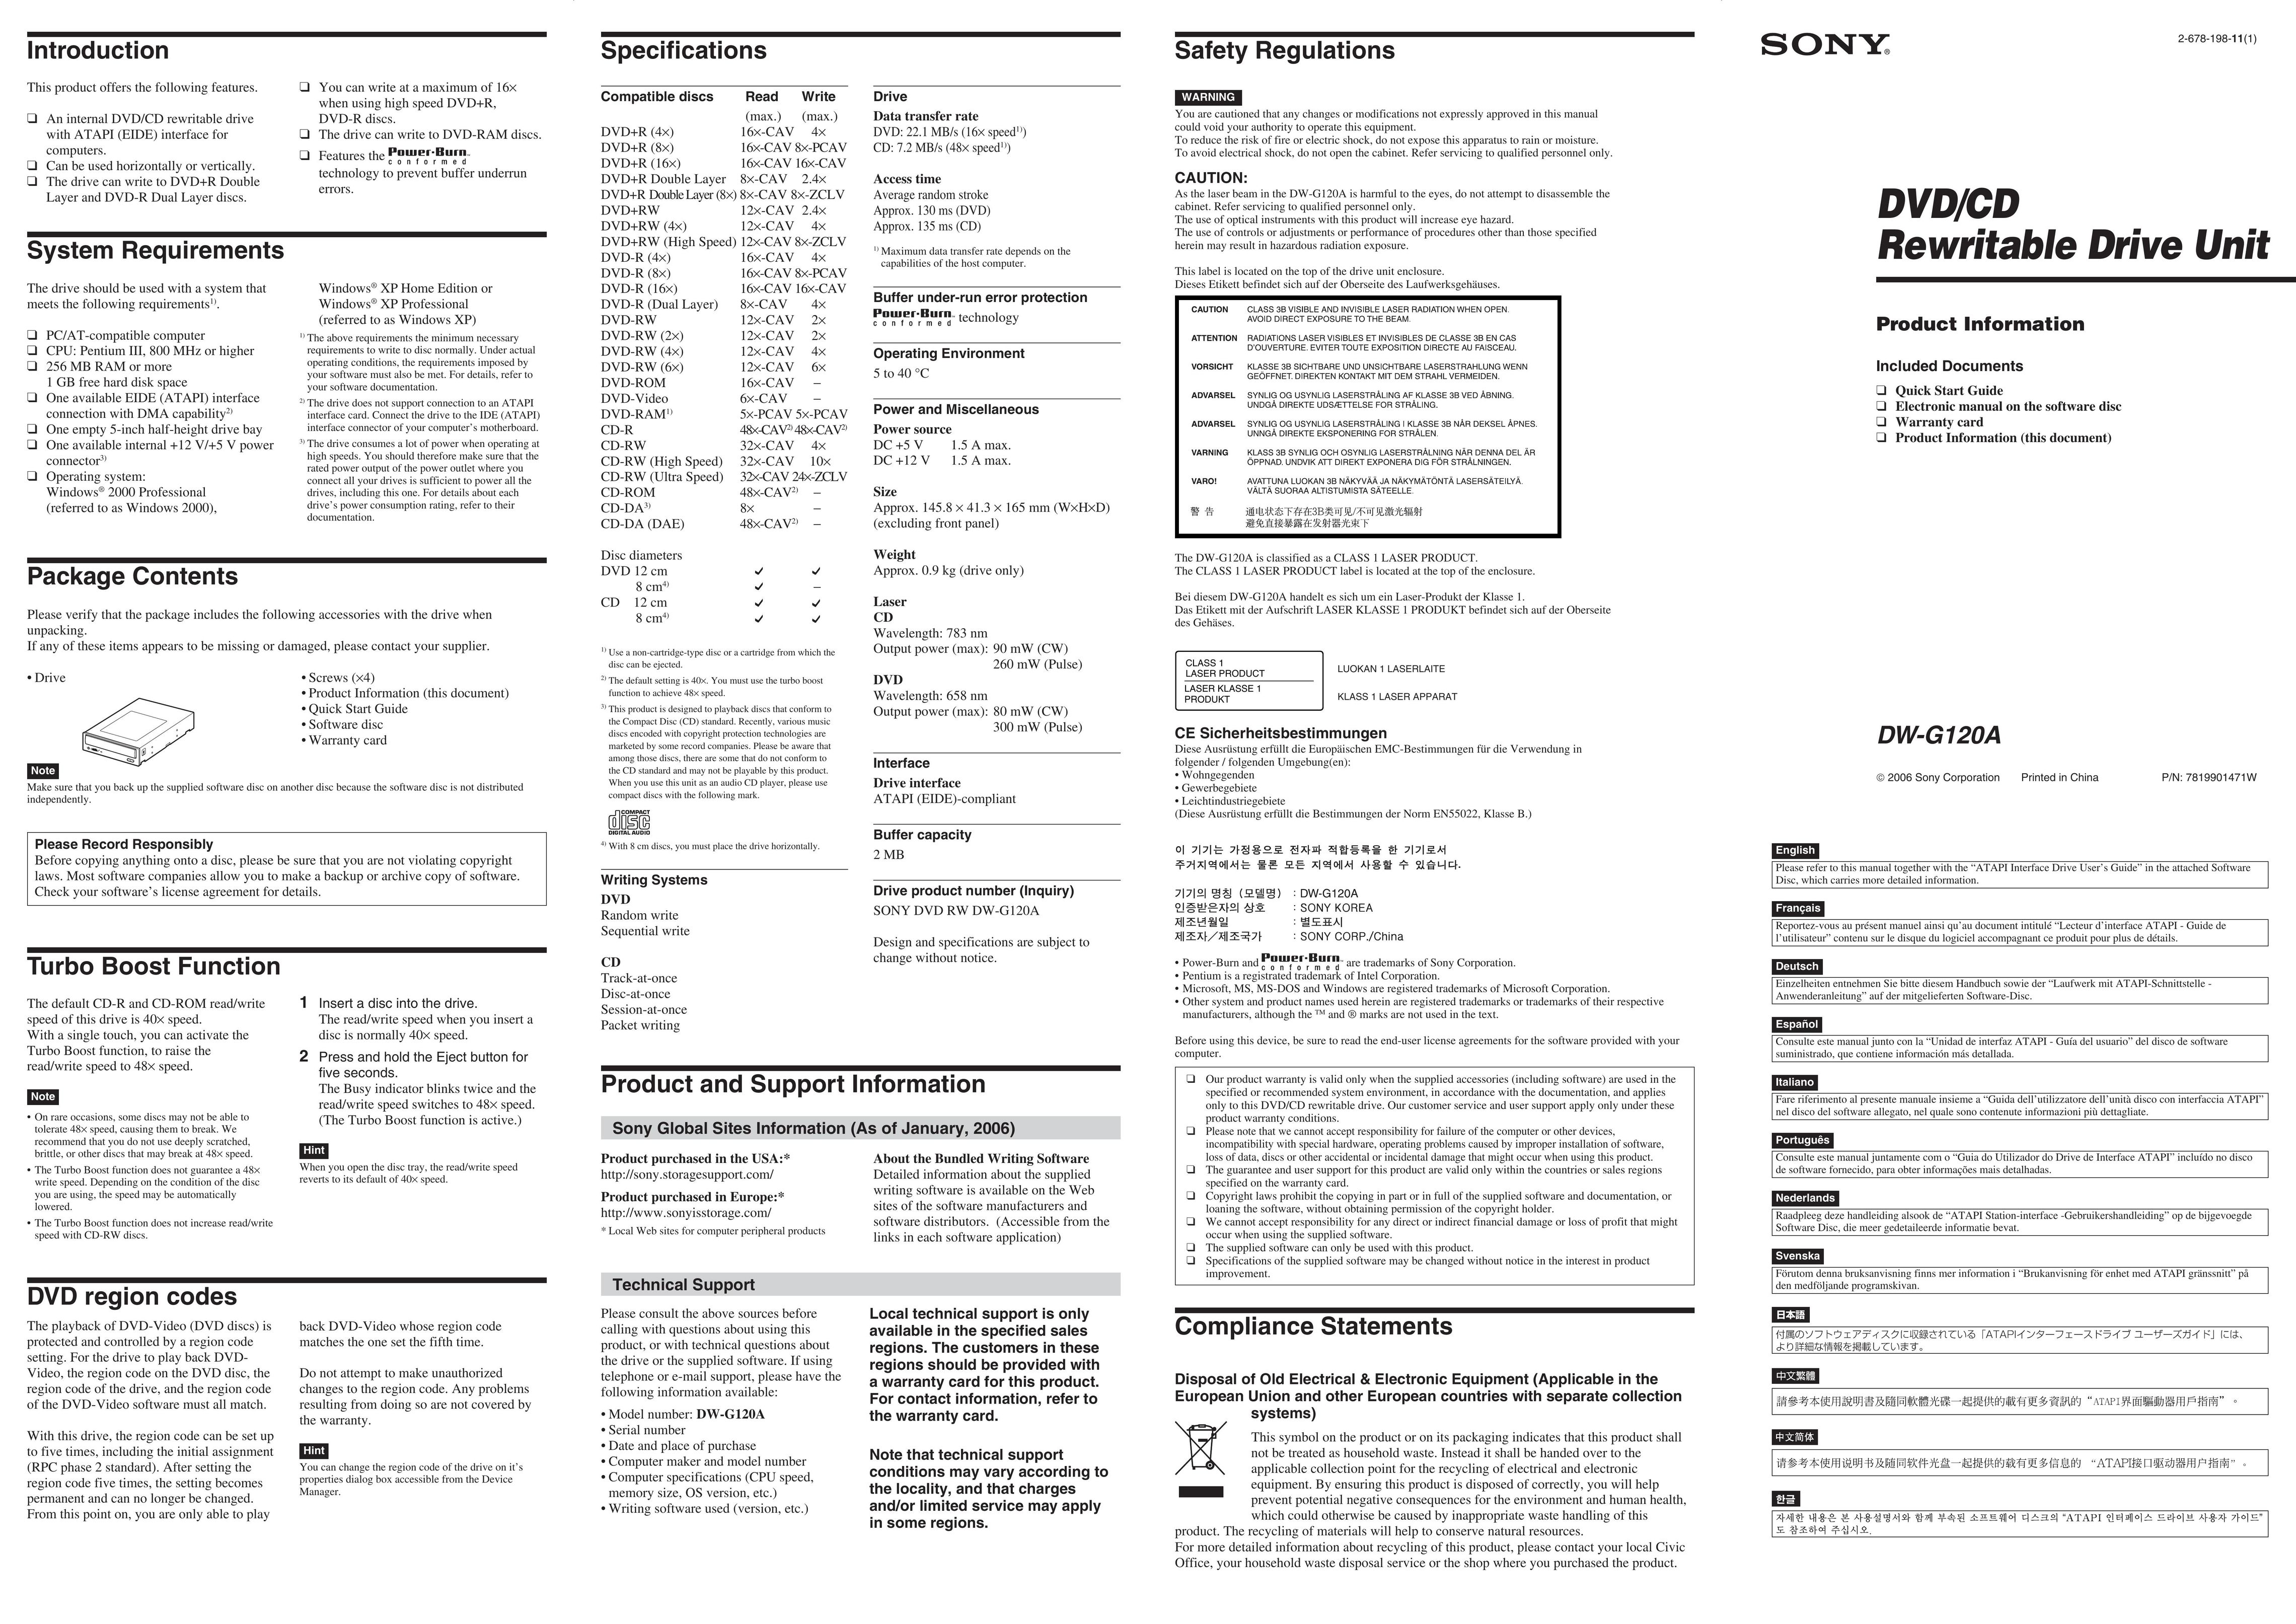 Sony DW-G120A Computer Drive User Manual